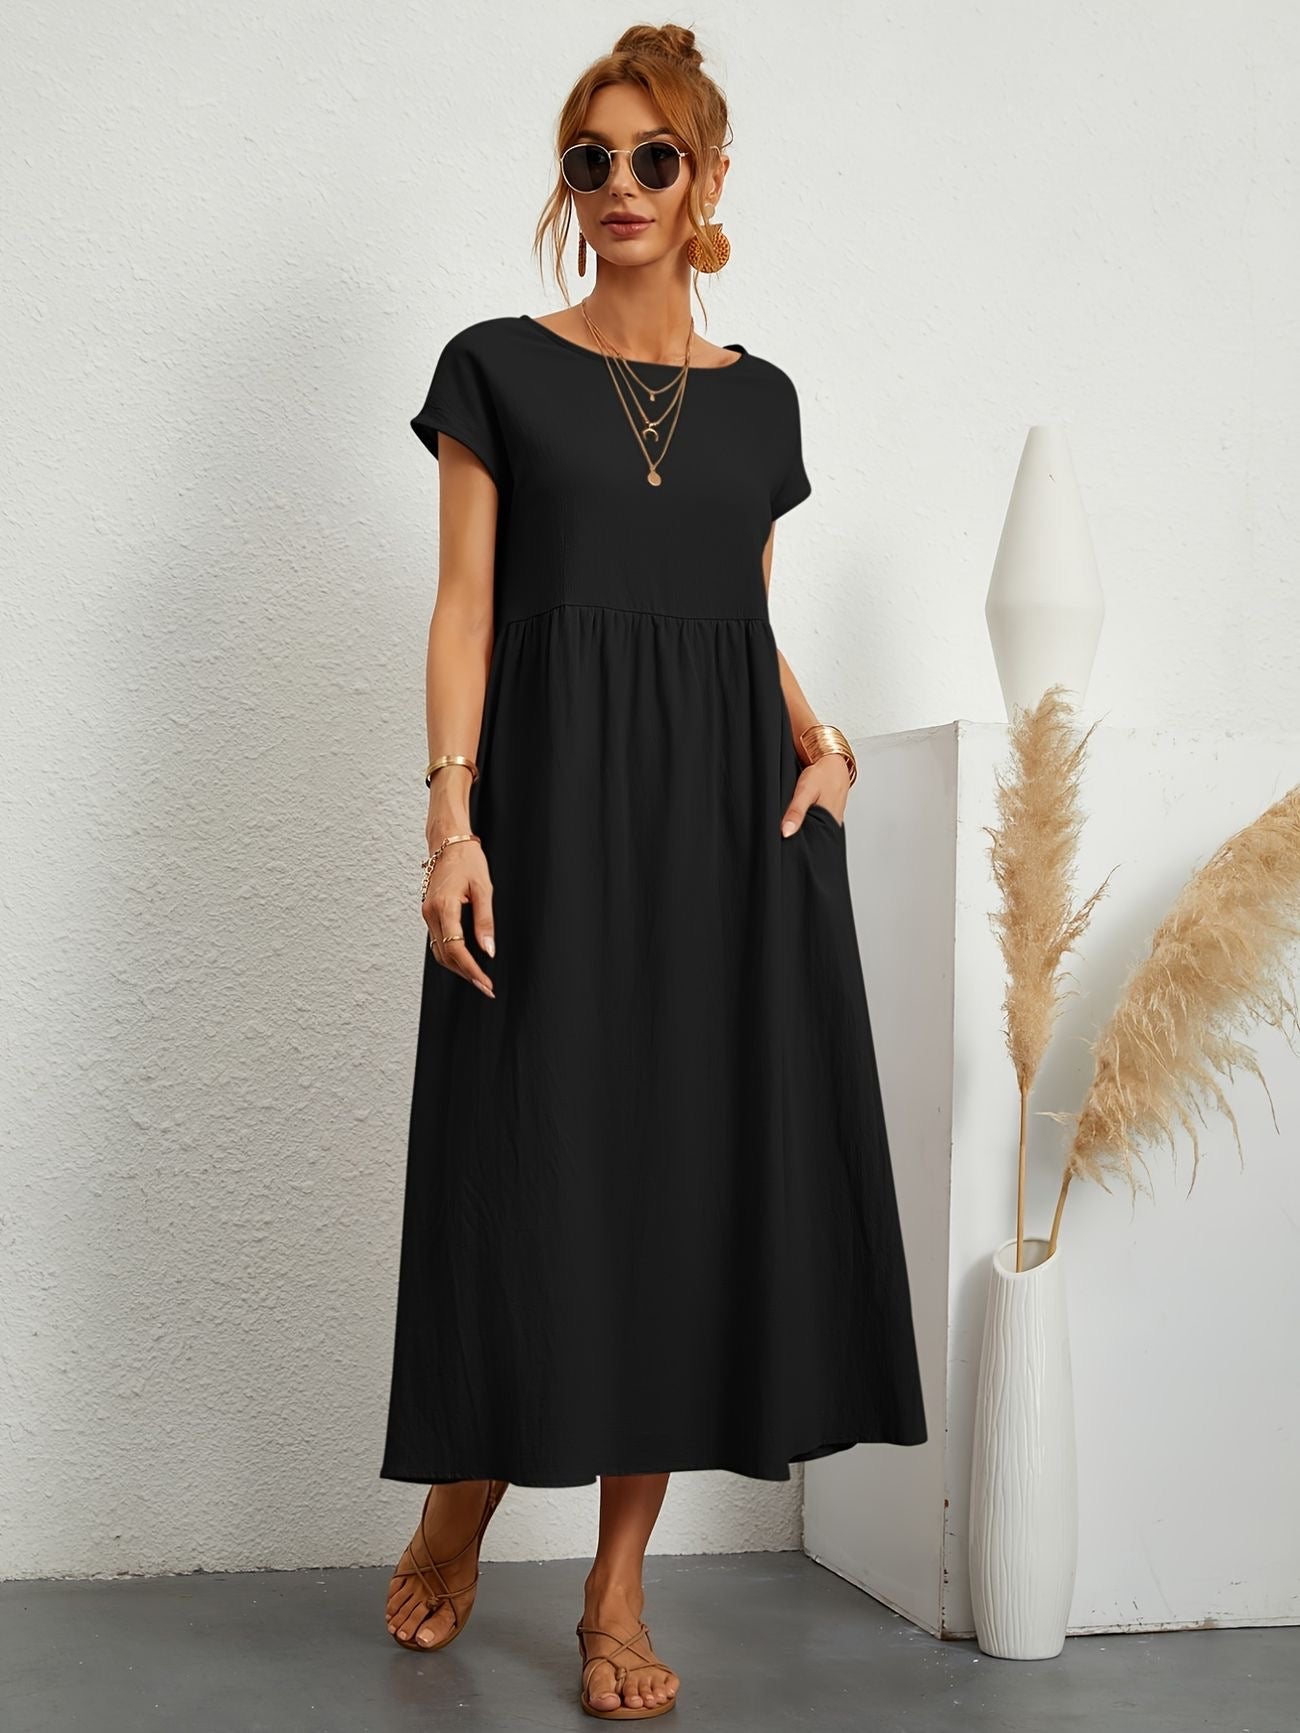 CLAIRE - CASUAL FALL DRESS WITH O-NECK